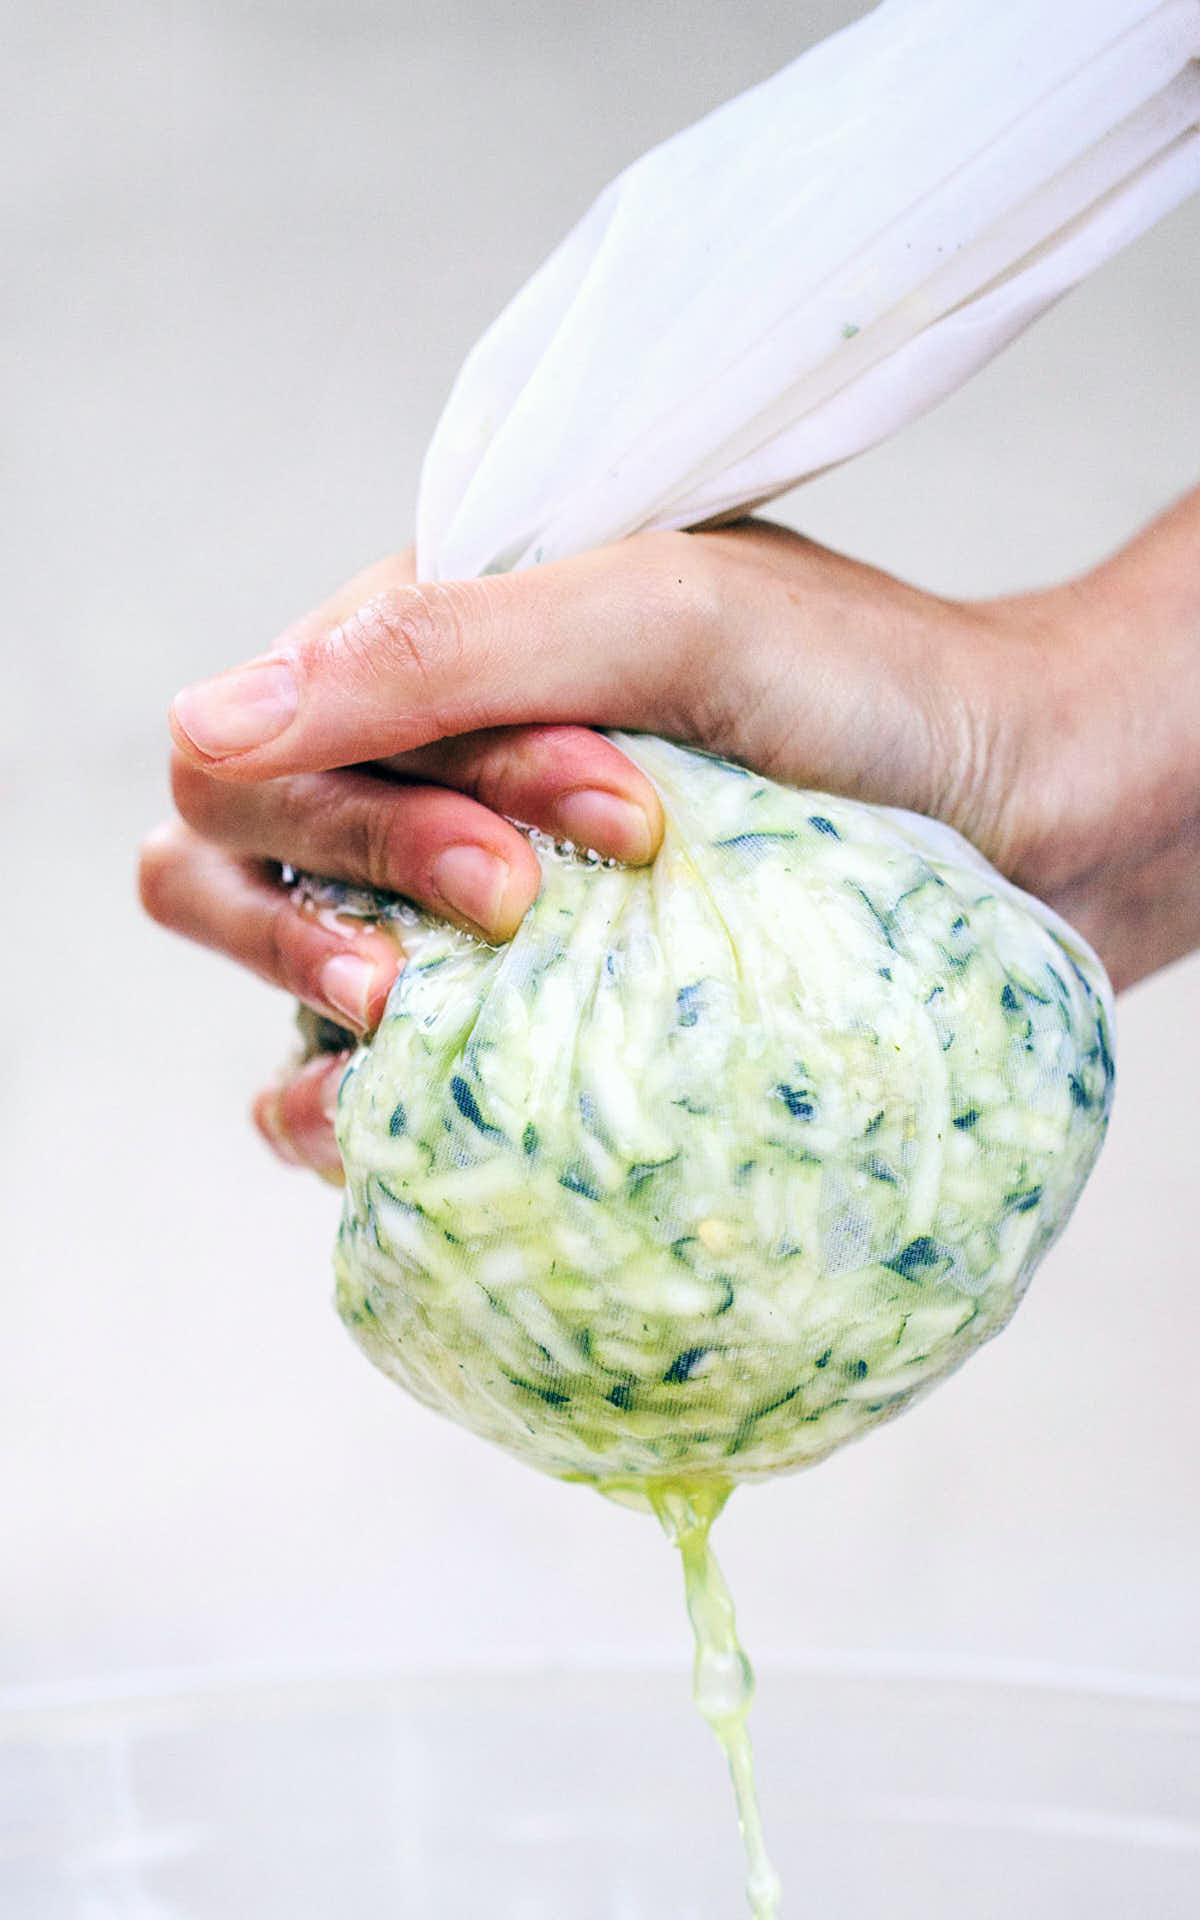 Squeezing excess water from zucchini with milk cloth bag